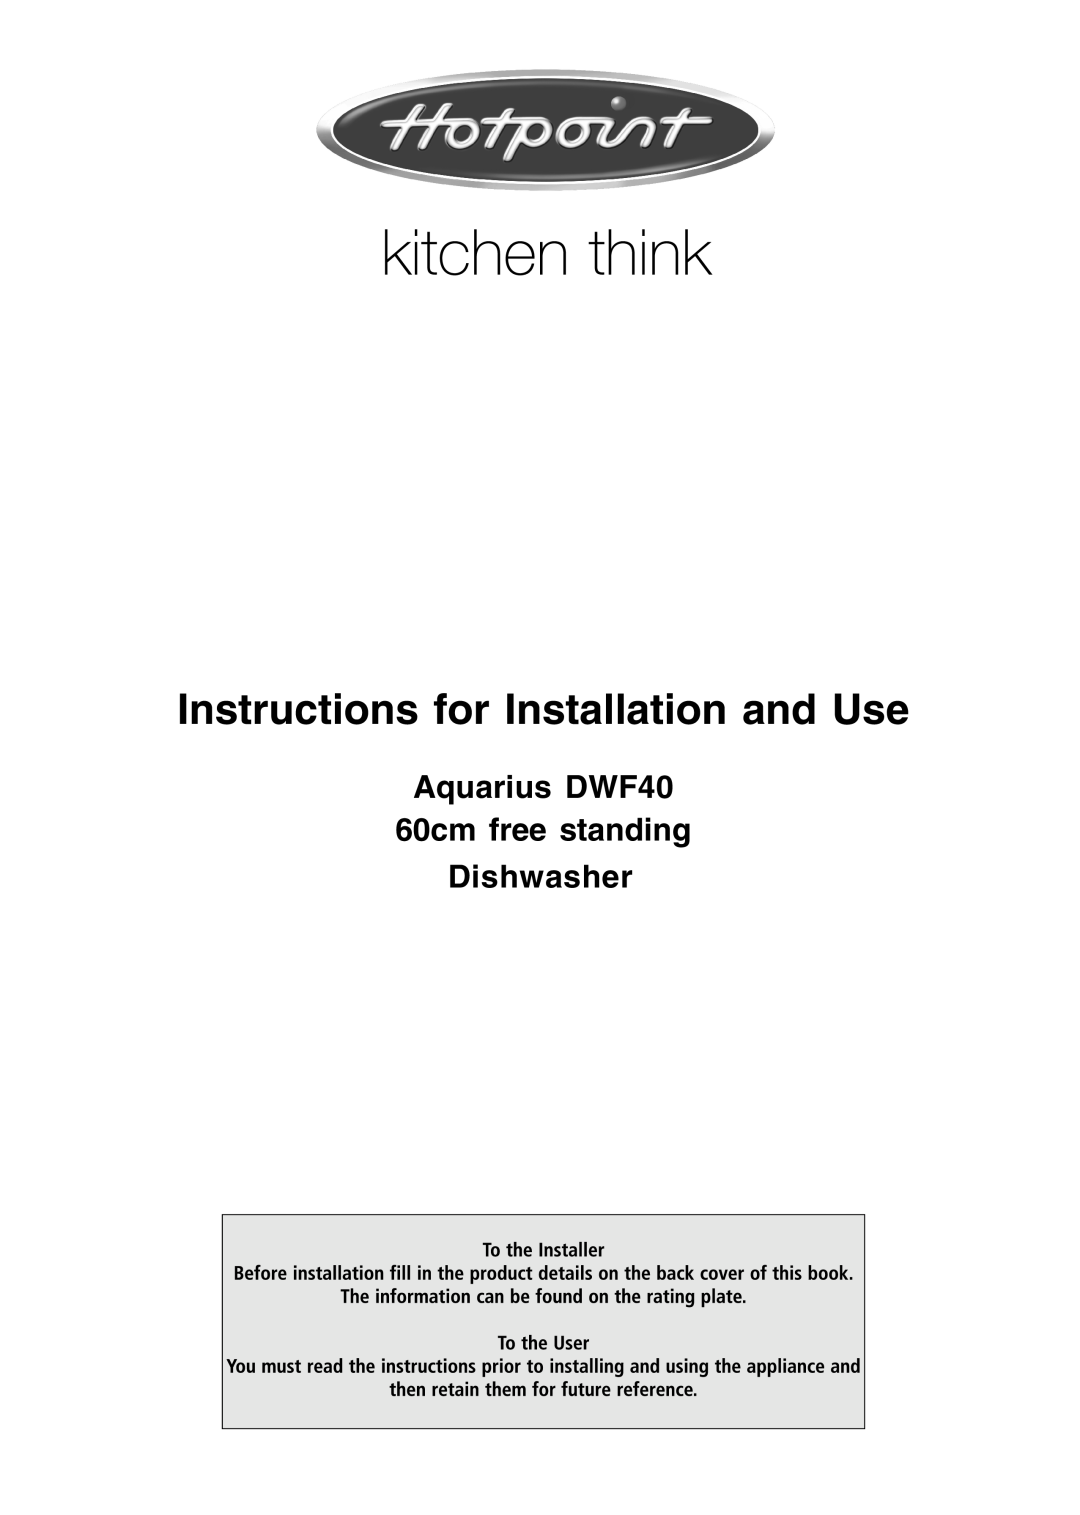 Hotpoint manual Instructions for Installation and Use, Aquarius DWF40 60cm free standing Dishwasher 